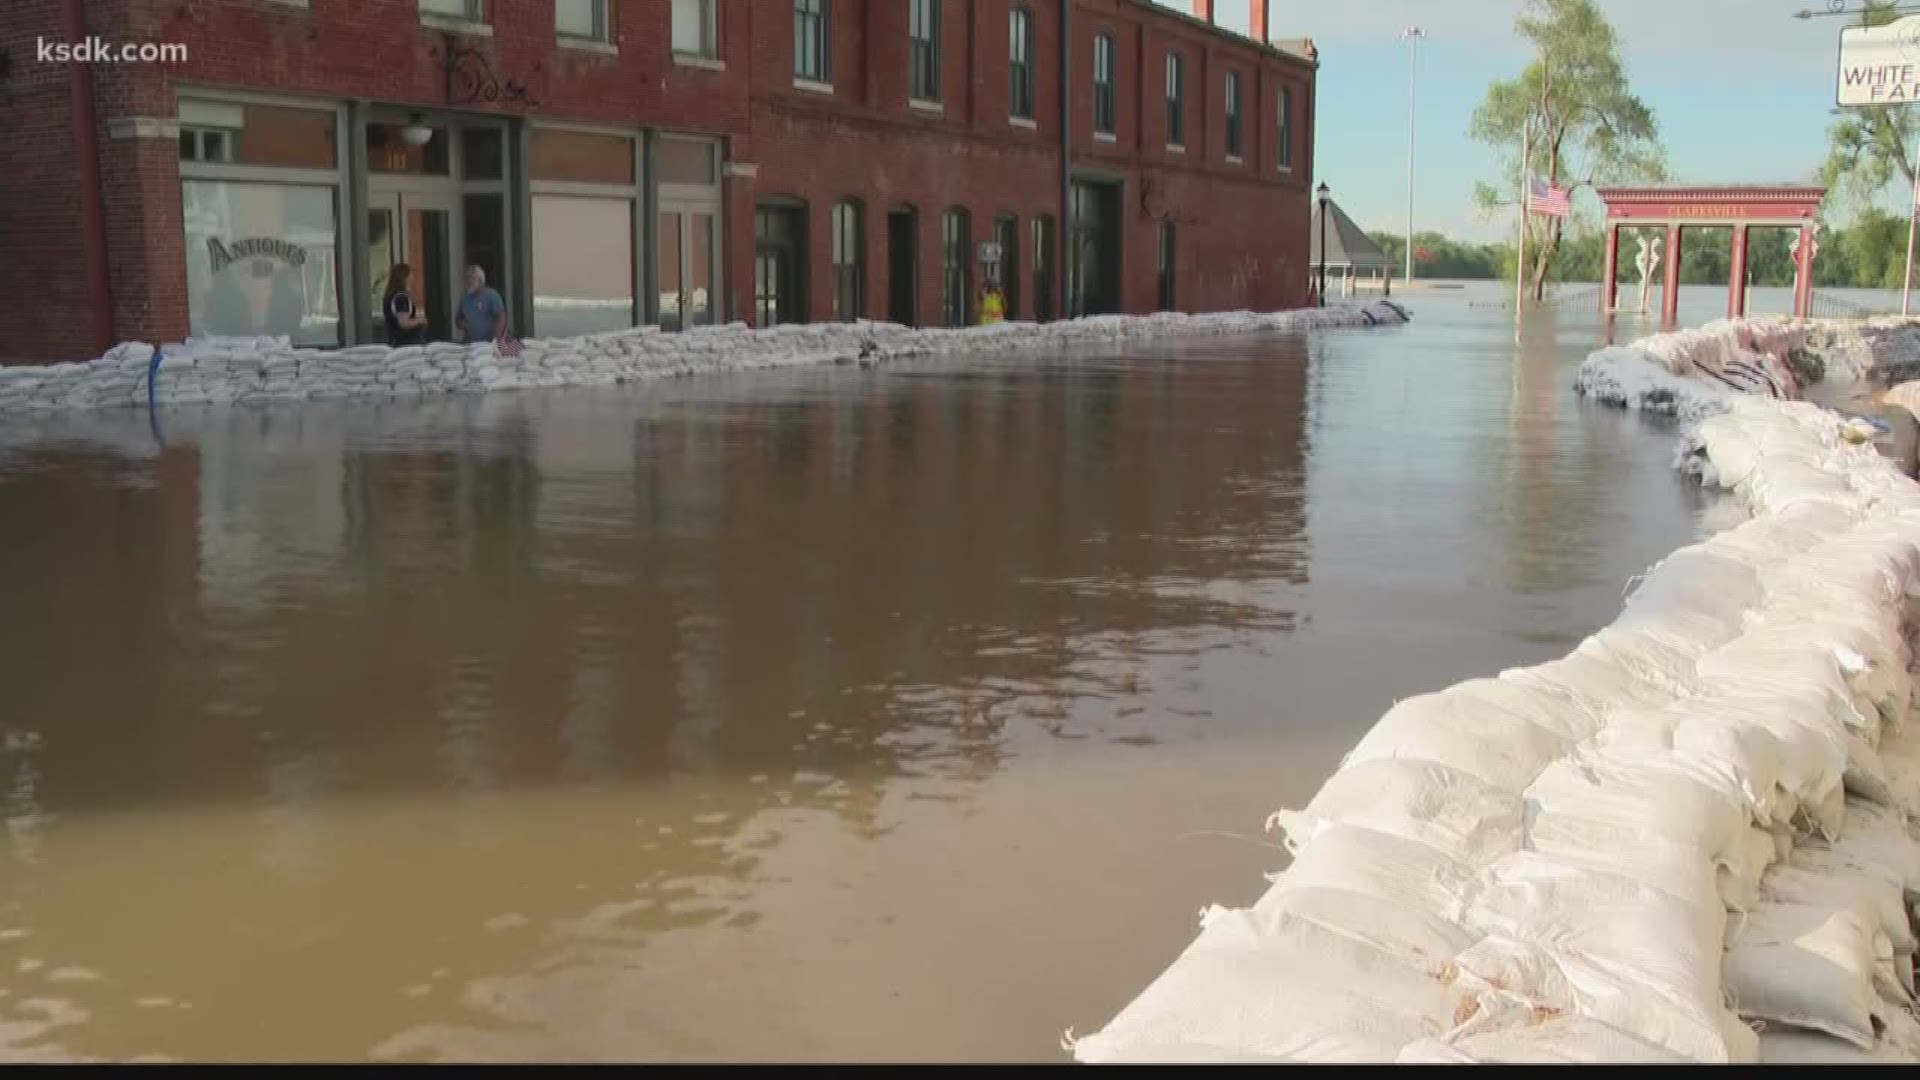 In Clarksville, crews are working all night long to add more sandbags to the wall protecting the historic town.